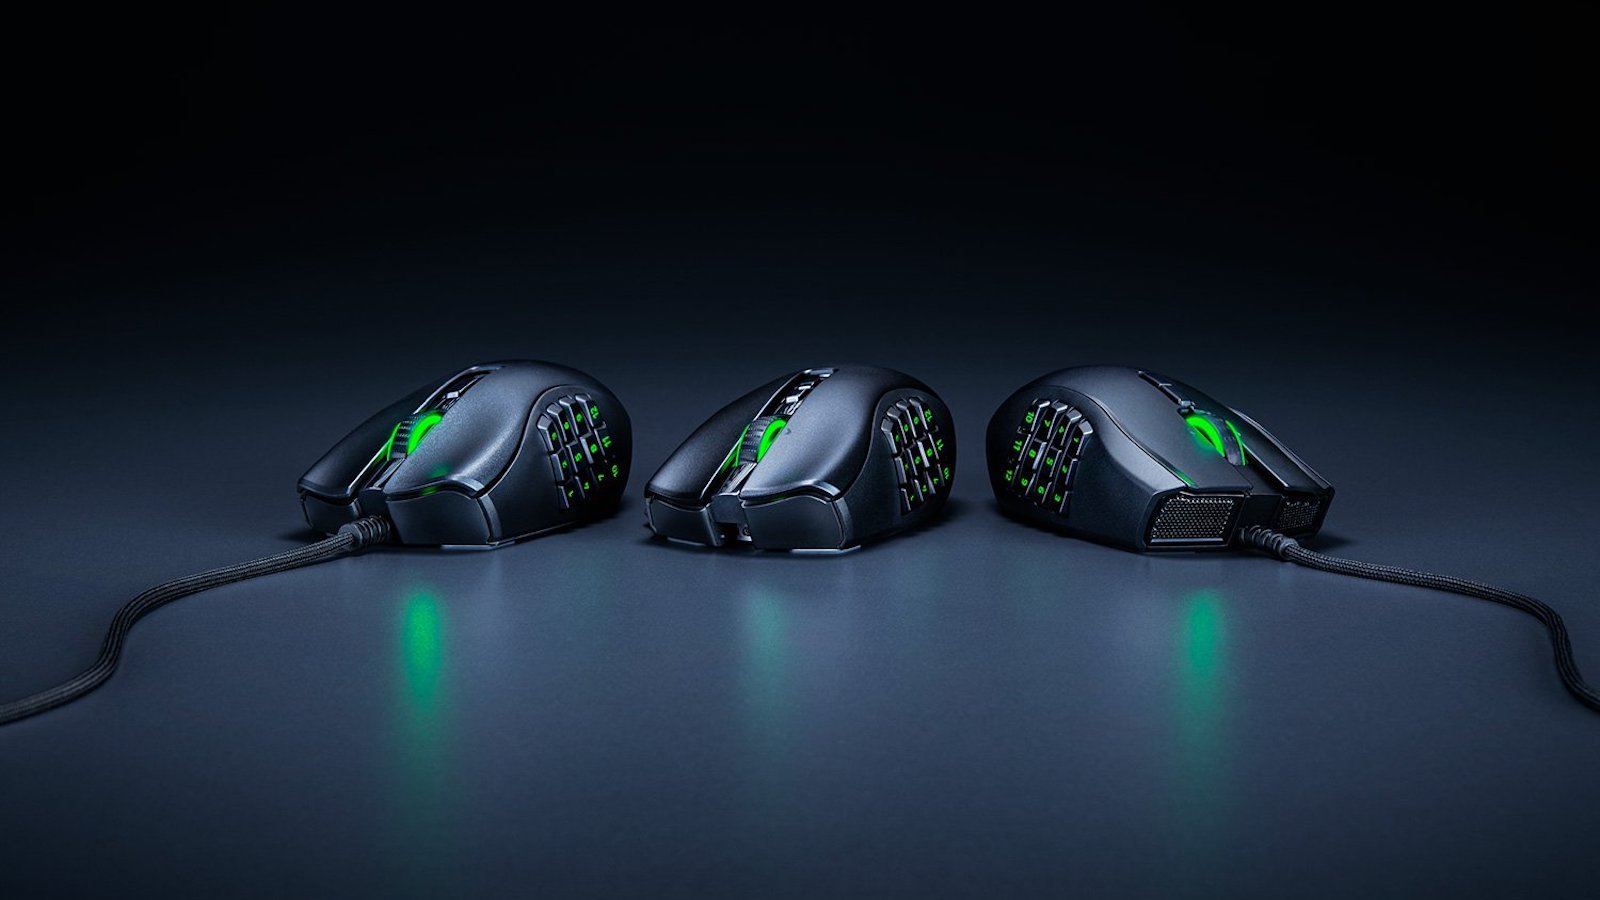 Razer Naga X ergonomic MMO gaming mouse features 16 advanced, programmable buttons